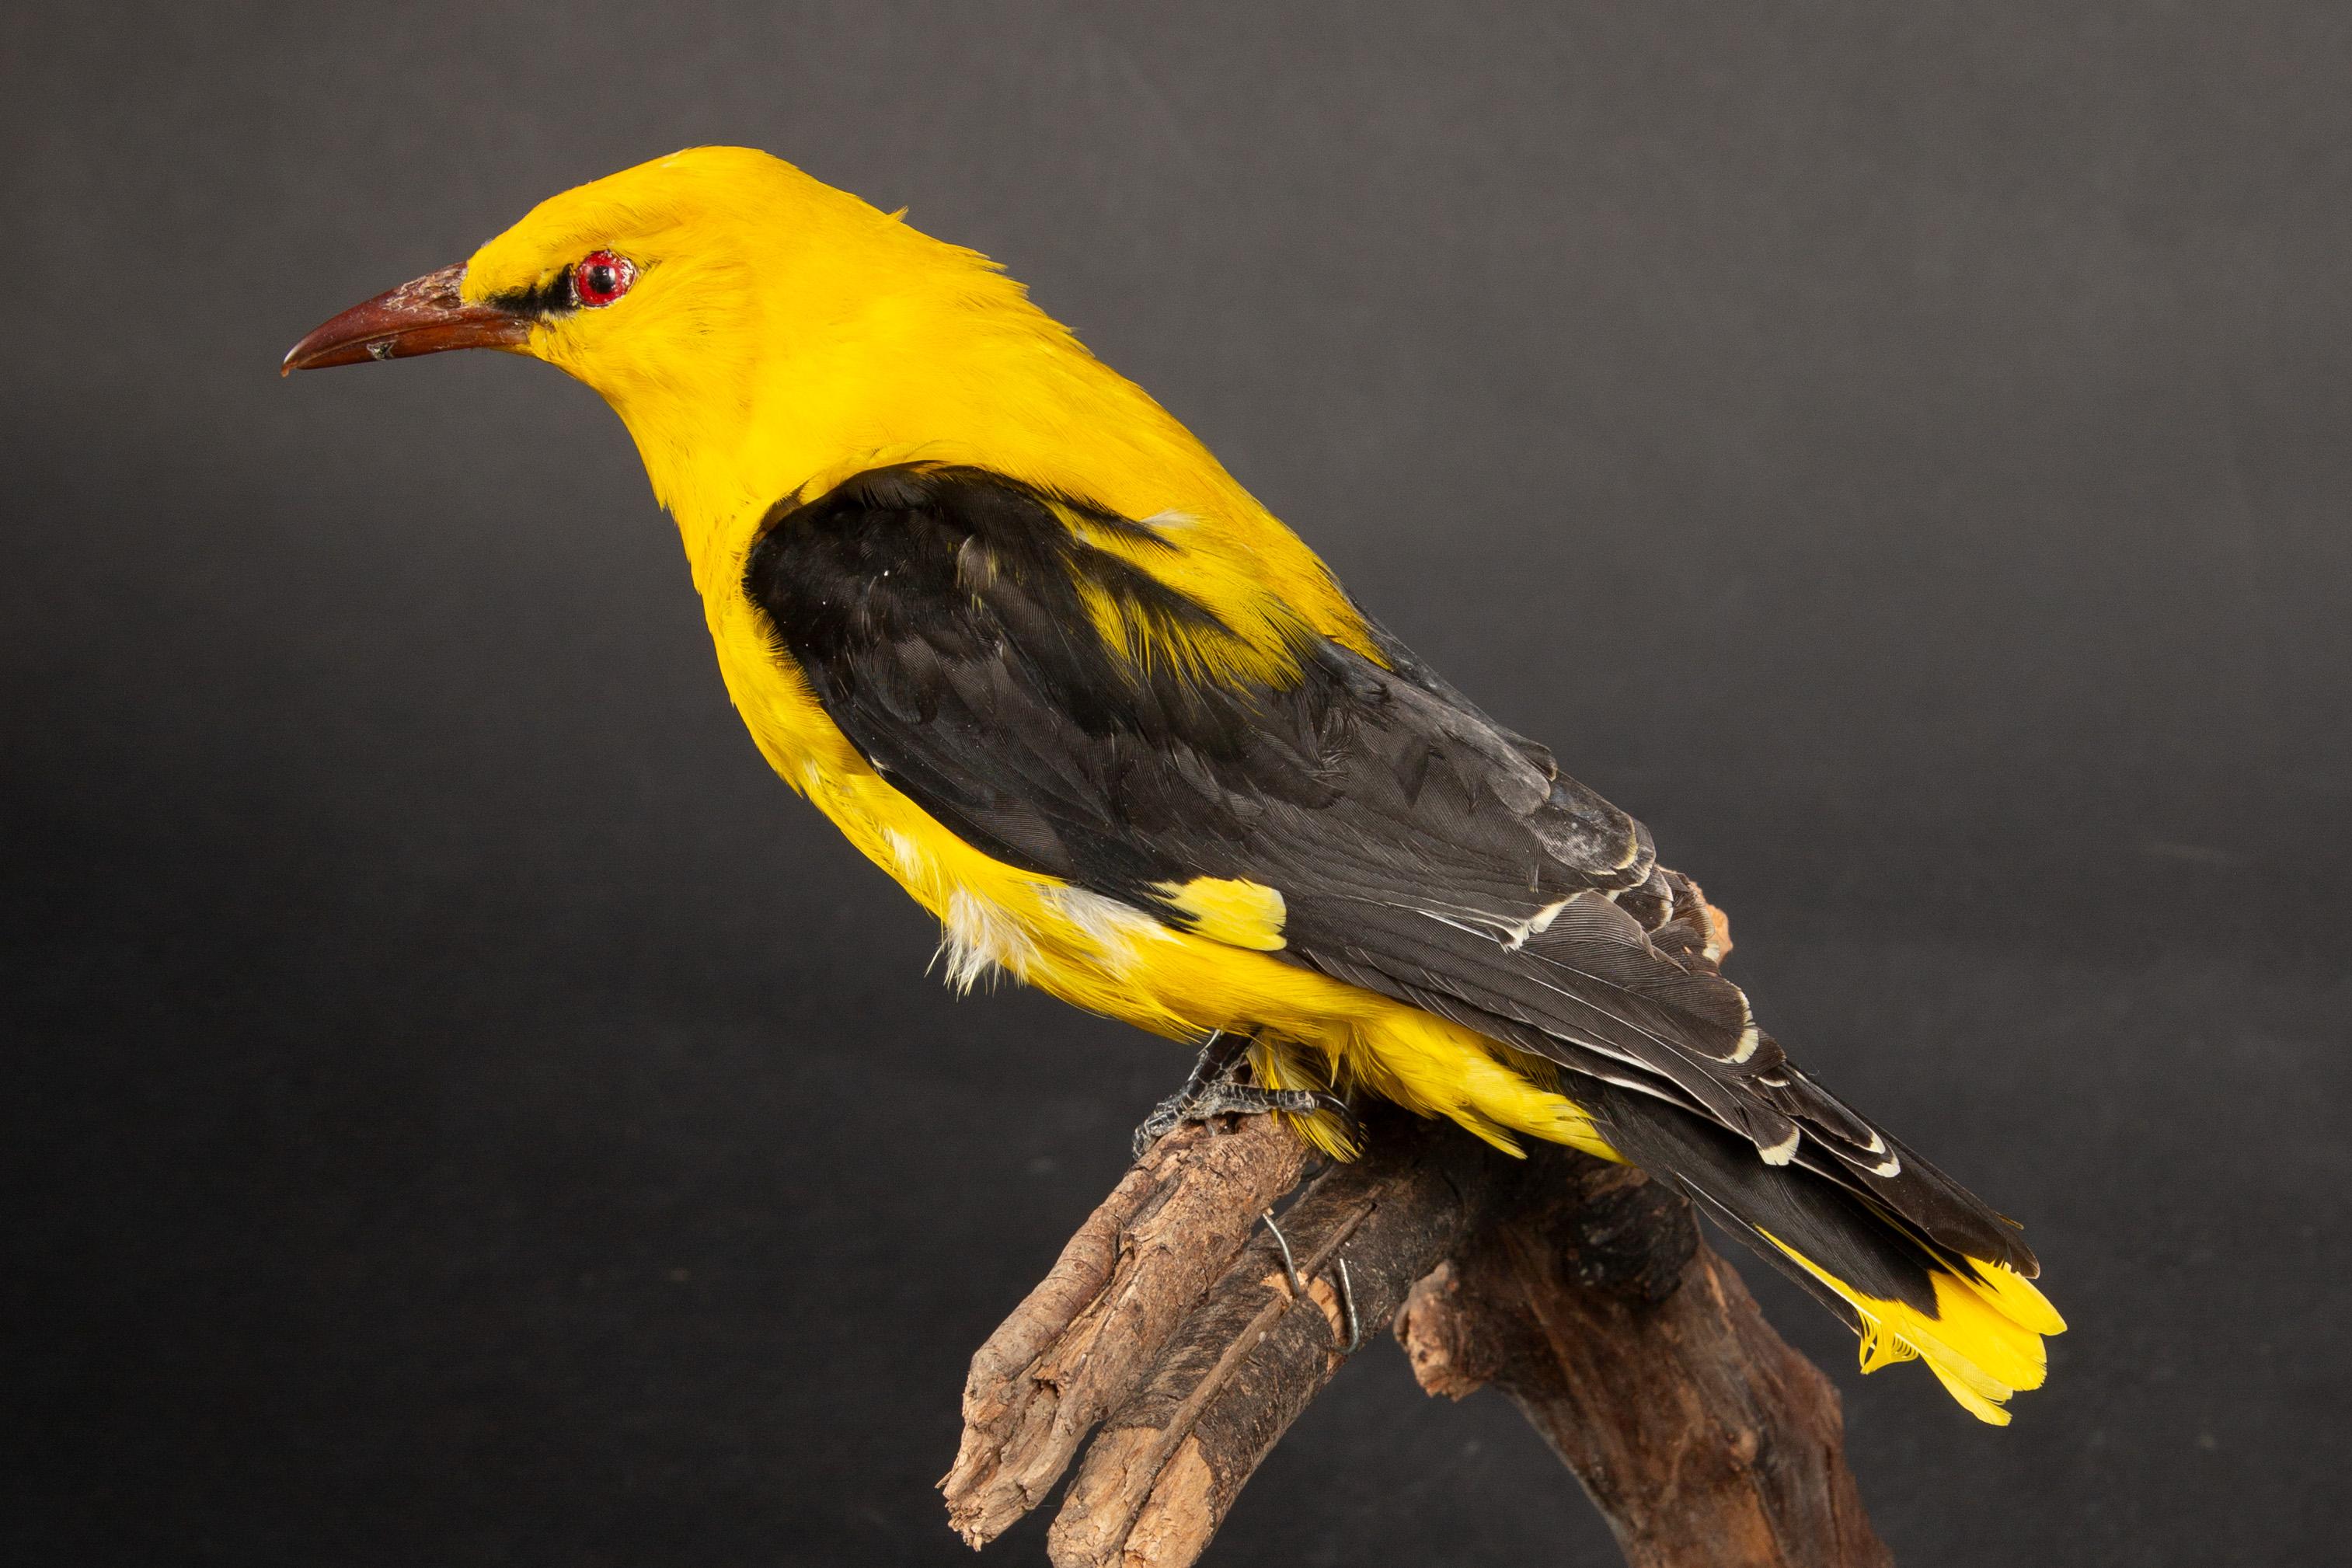 Contemporary Exquisite Taxidermy Display: Yellow Oriole Perched on Naturalistic Branch